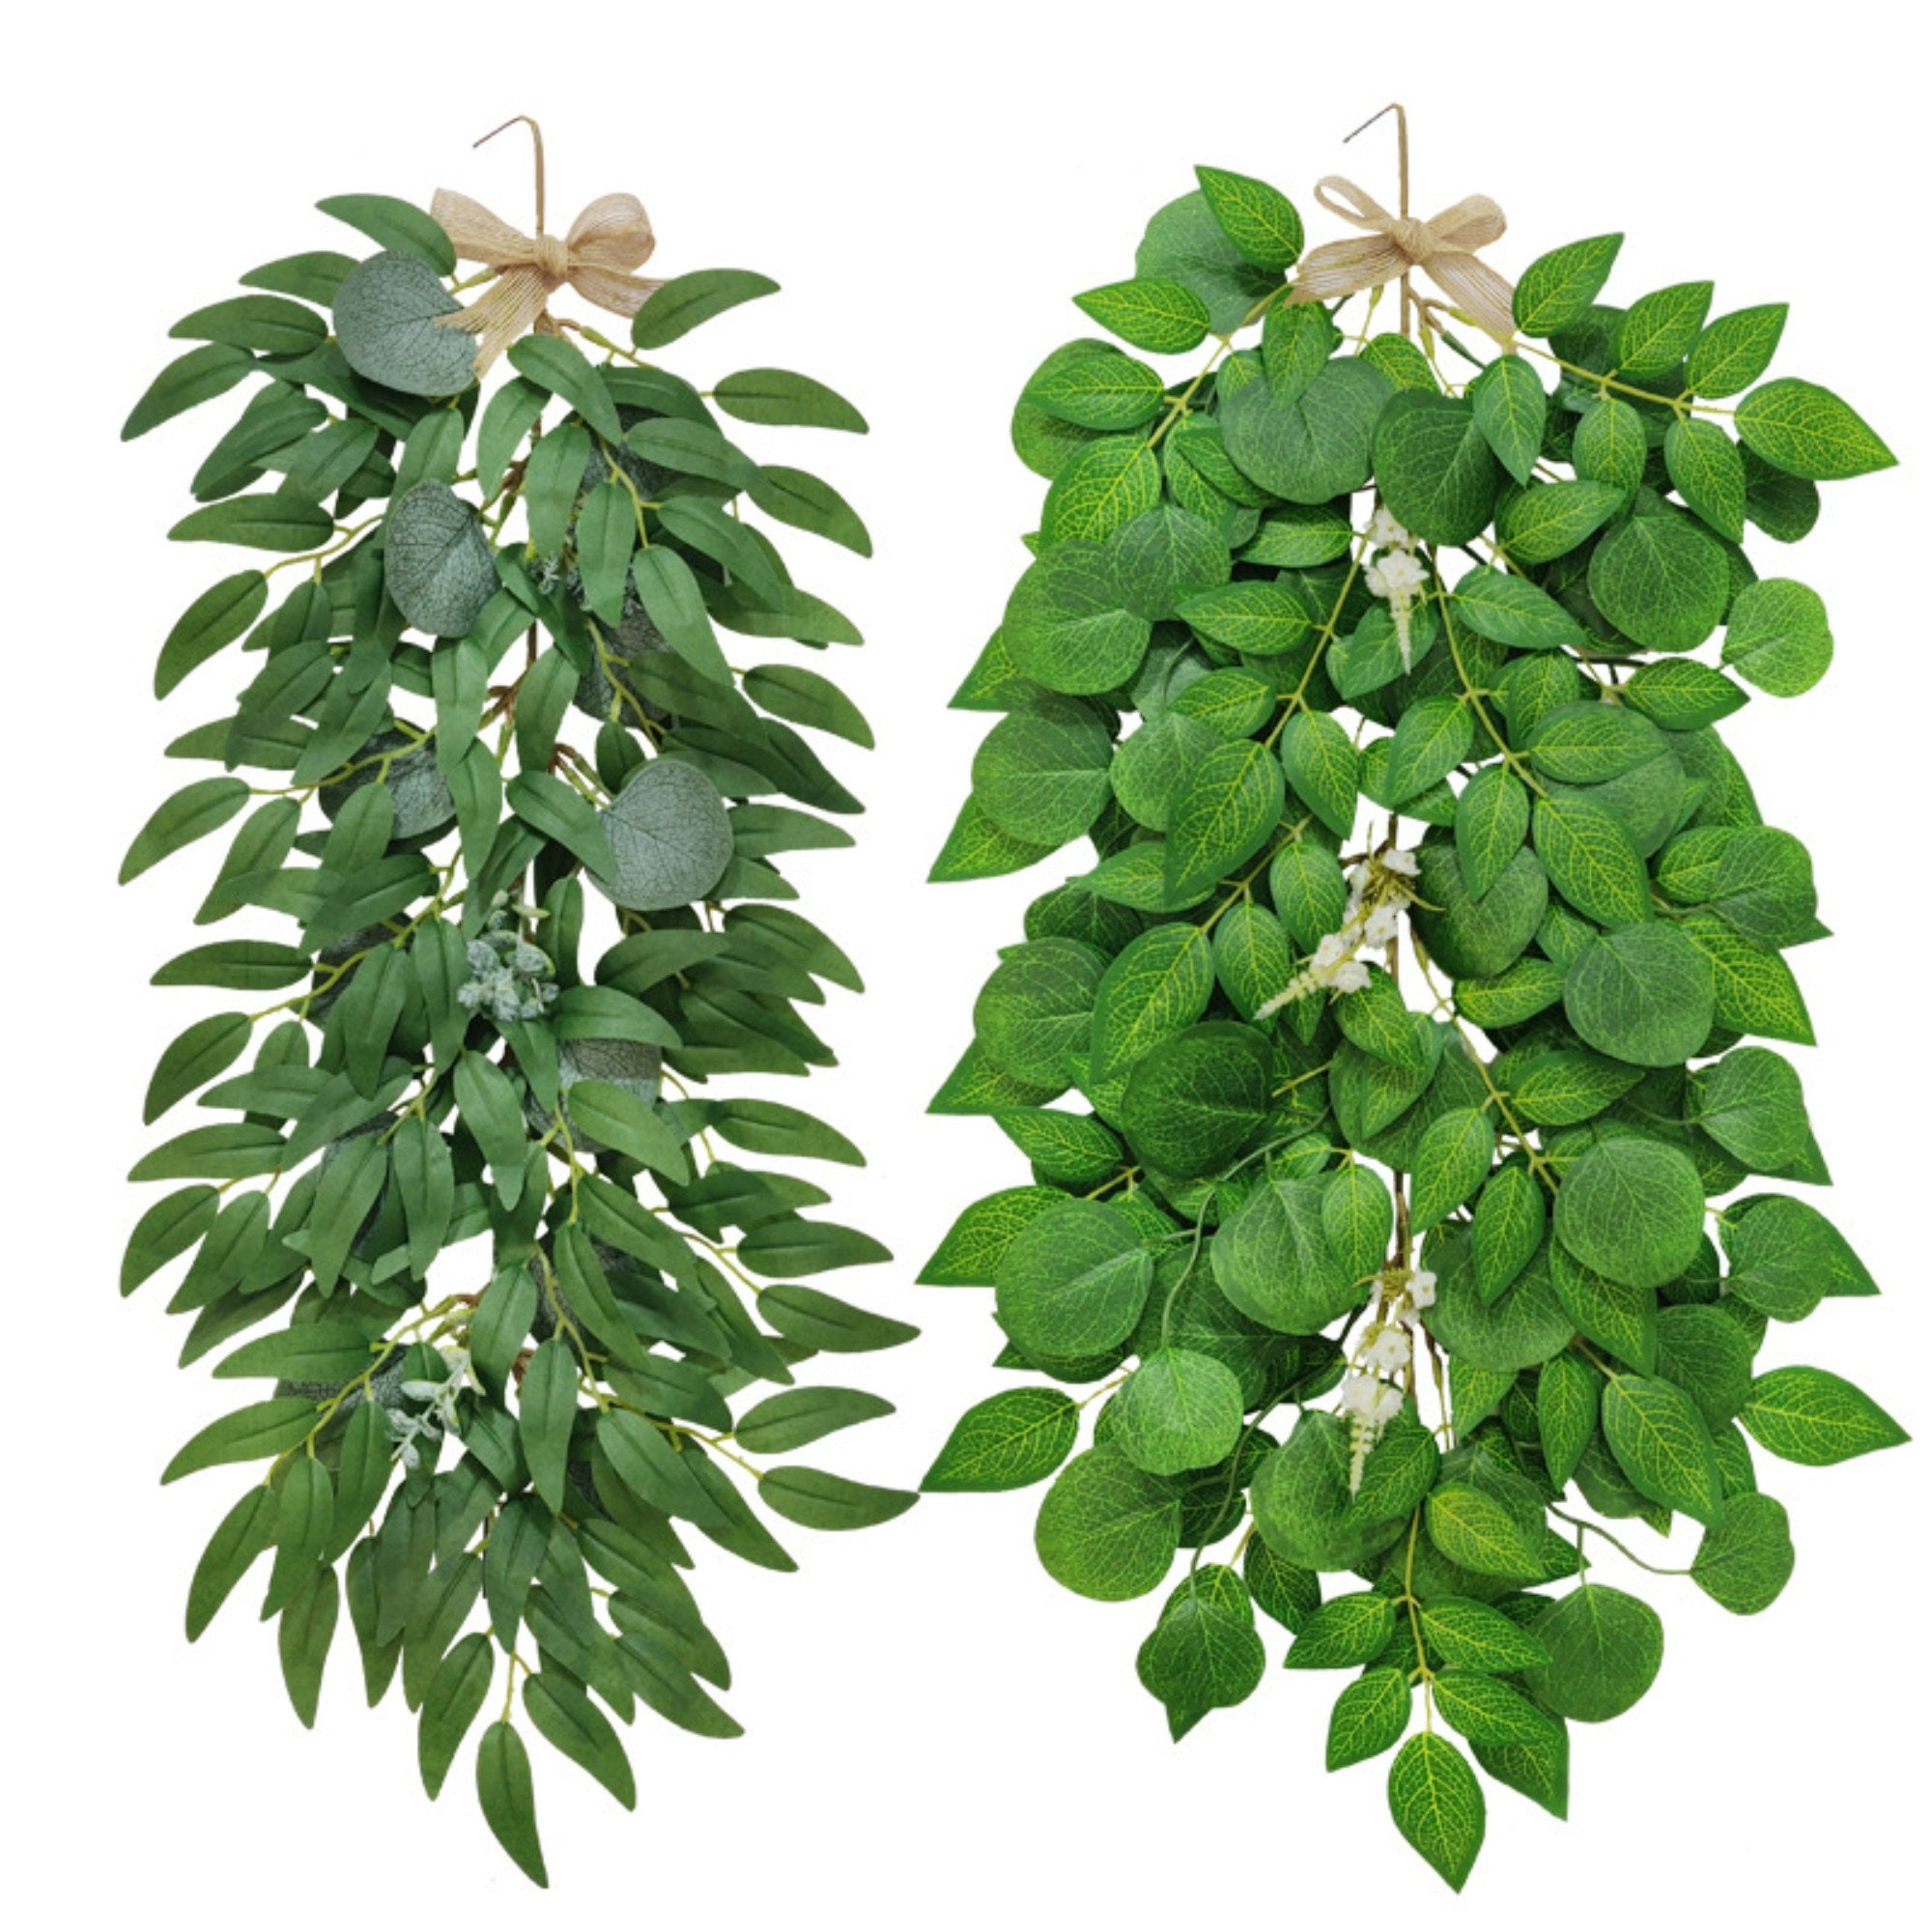 1Pc Fake Wisteria Leaf Wall Hanging Artificial Vines Faux Green